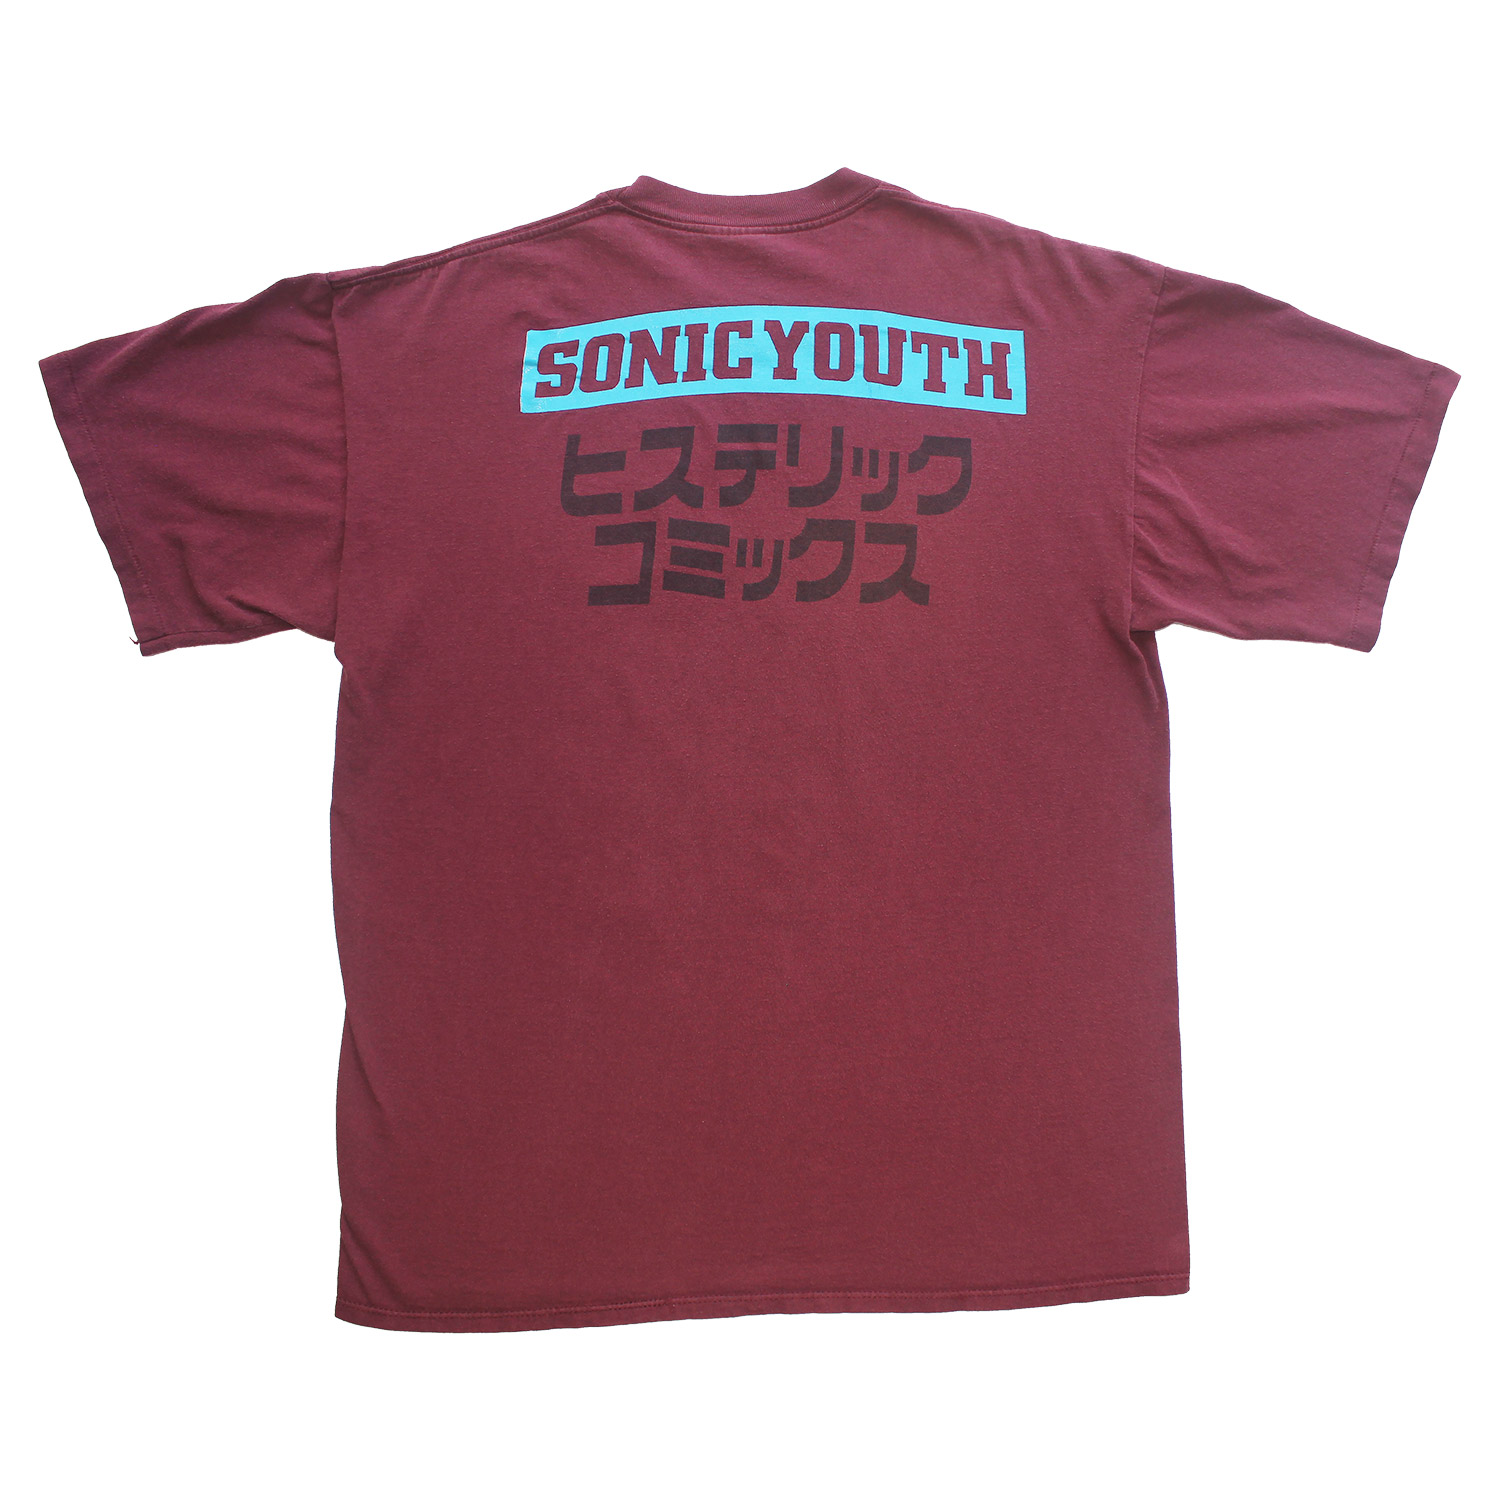 Vintage Sonic Youth Hysteric Comics T-shirt, Size XL, Back